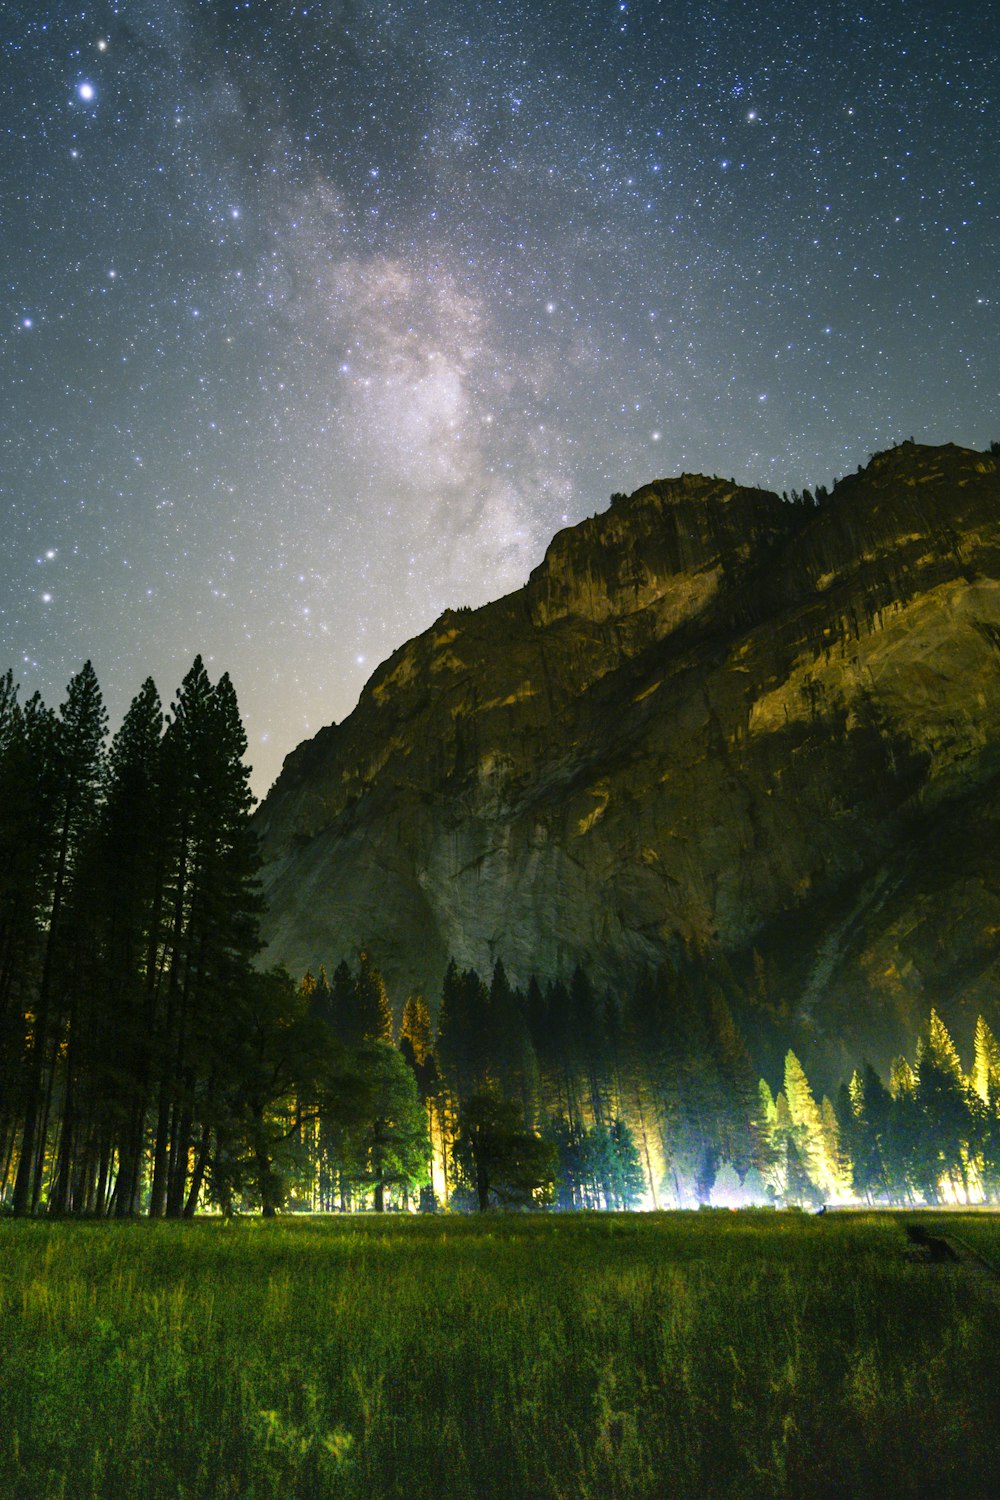 green grass field and tall trees in front of mountain under the galaxy